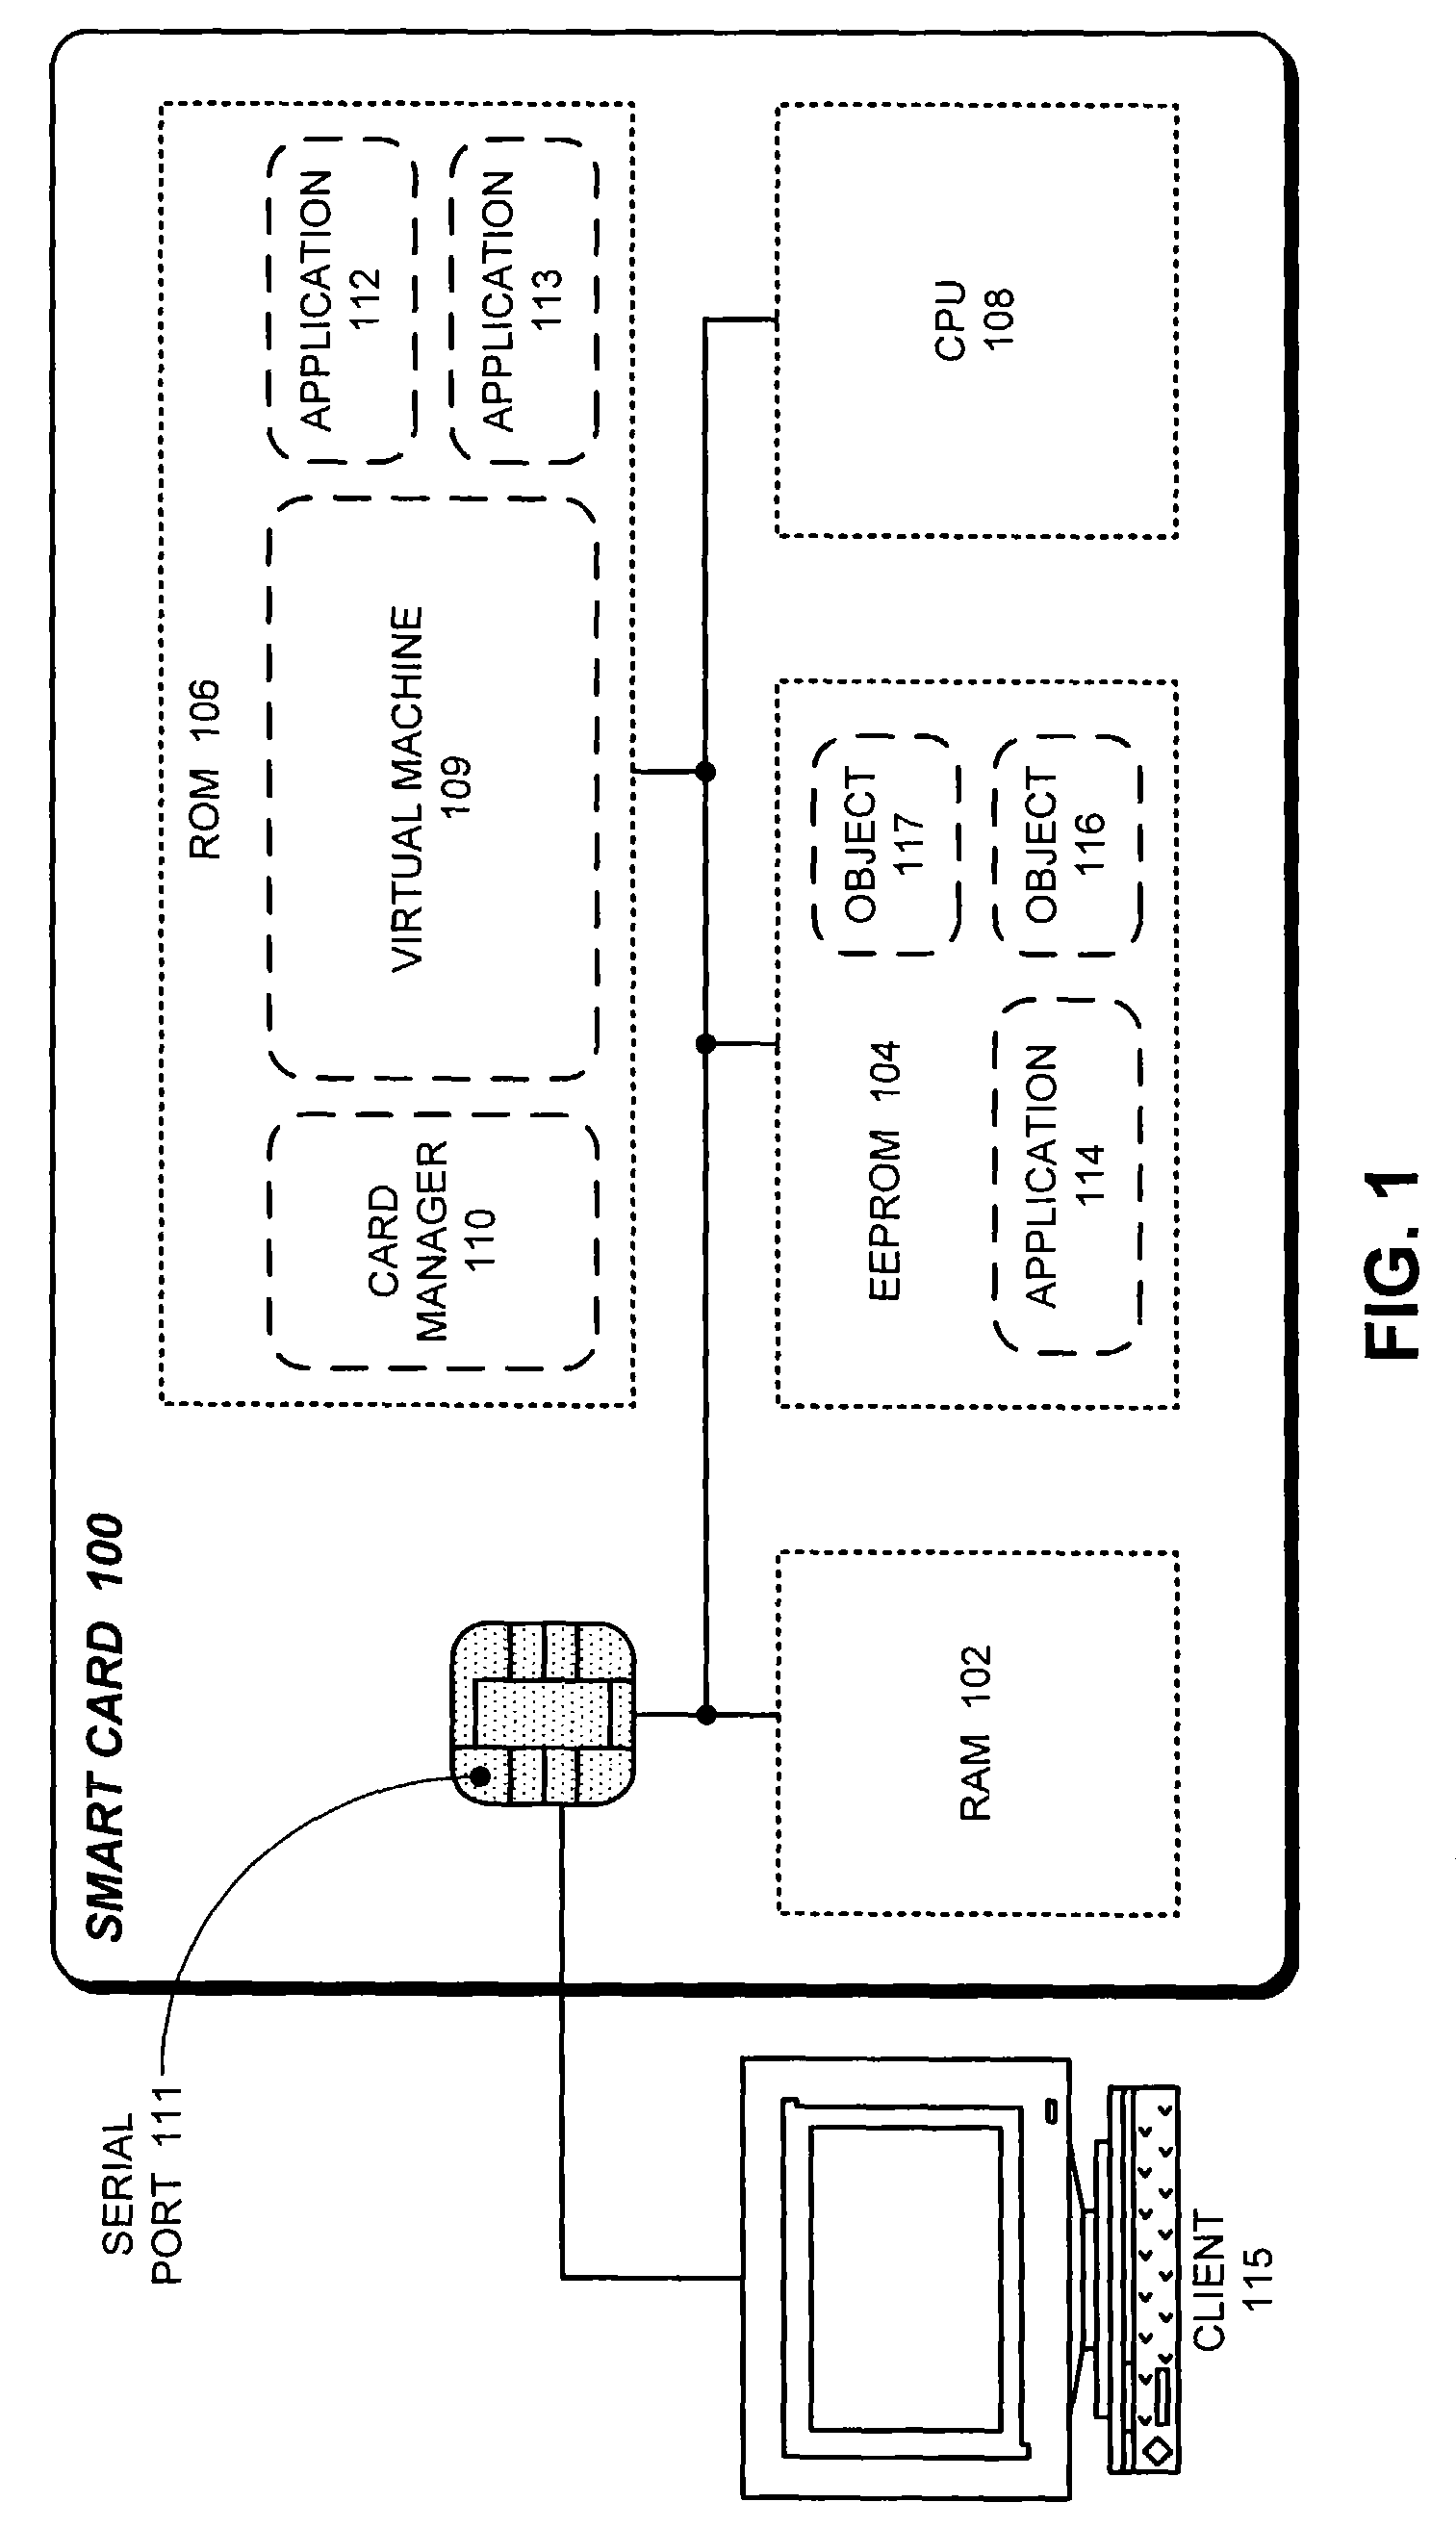 Method and apparatus to facilitate code verification and garbage collection in a platform-independent virtual machine